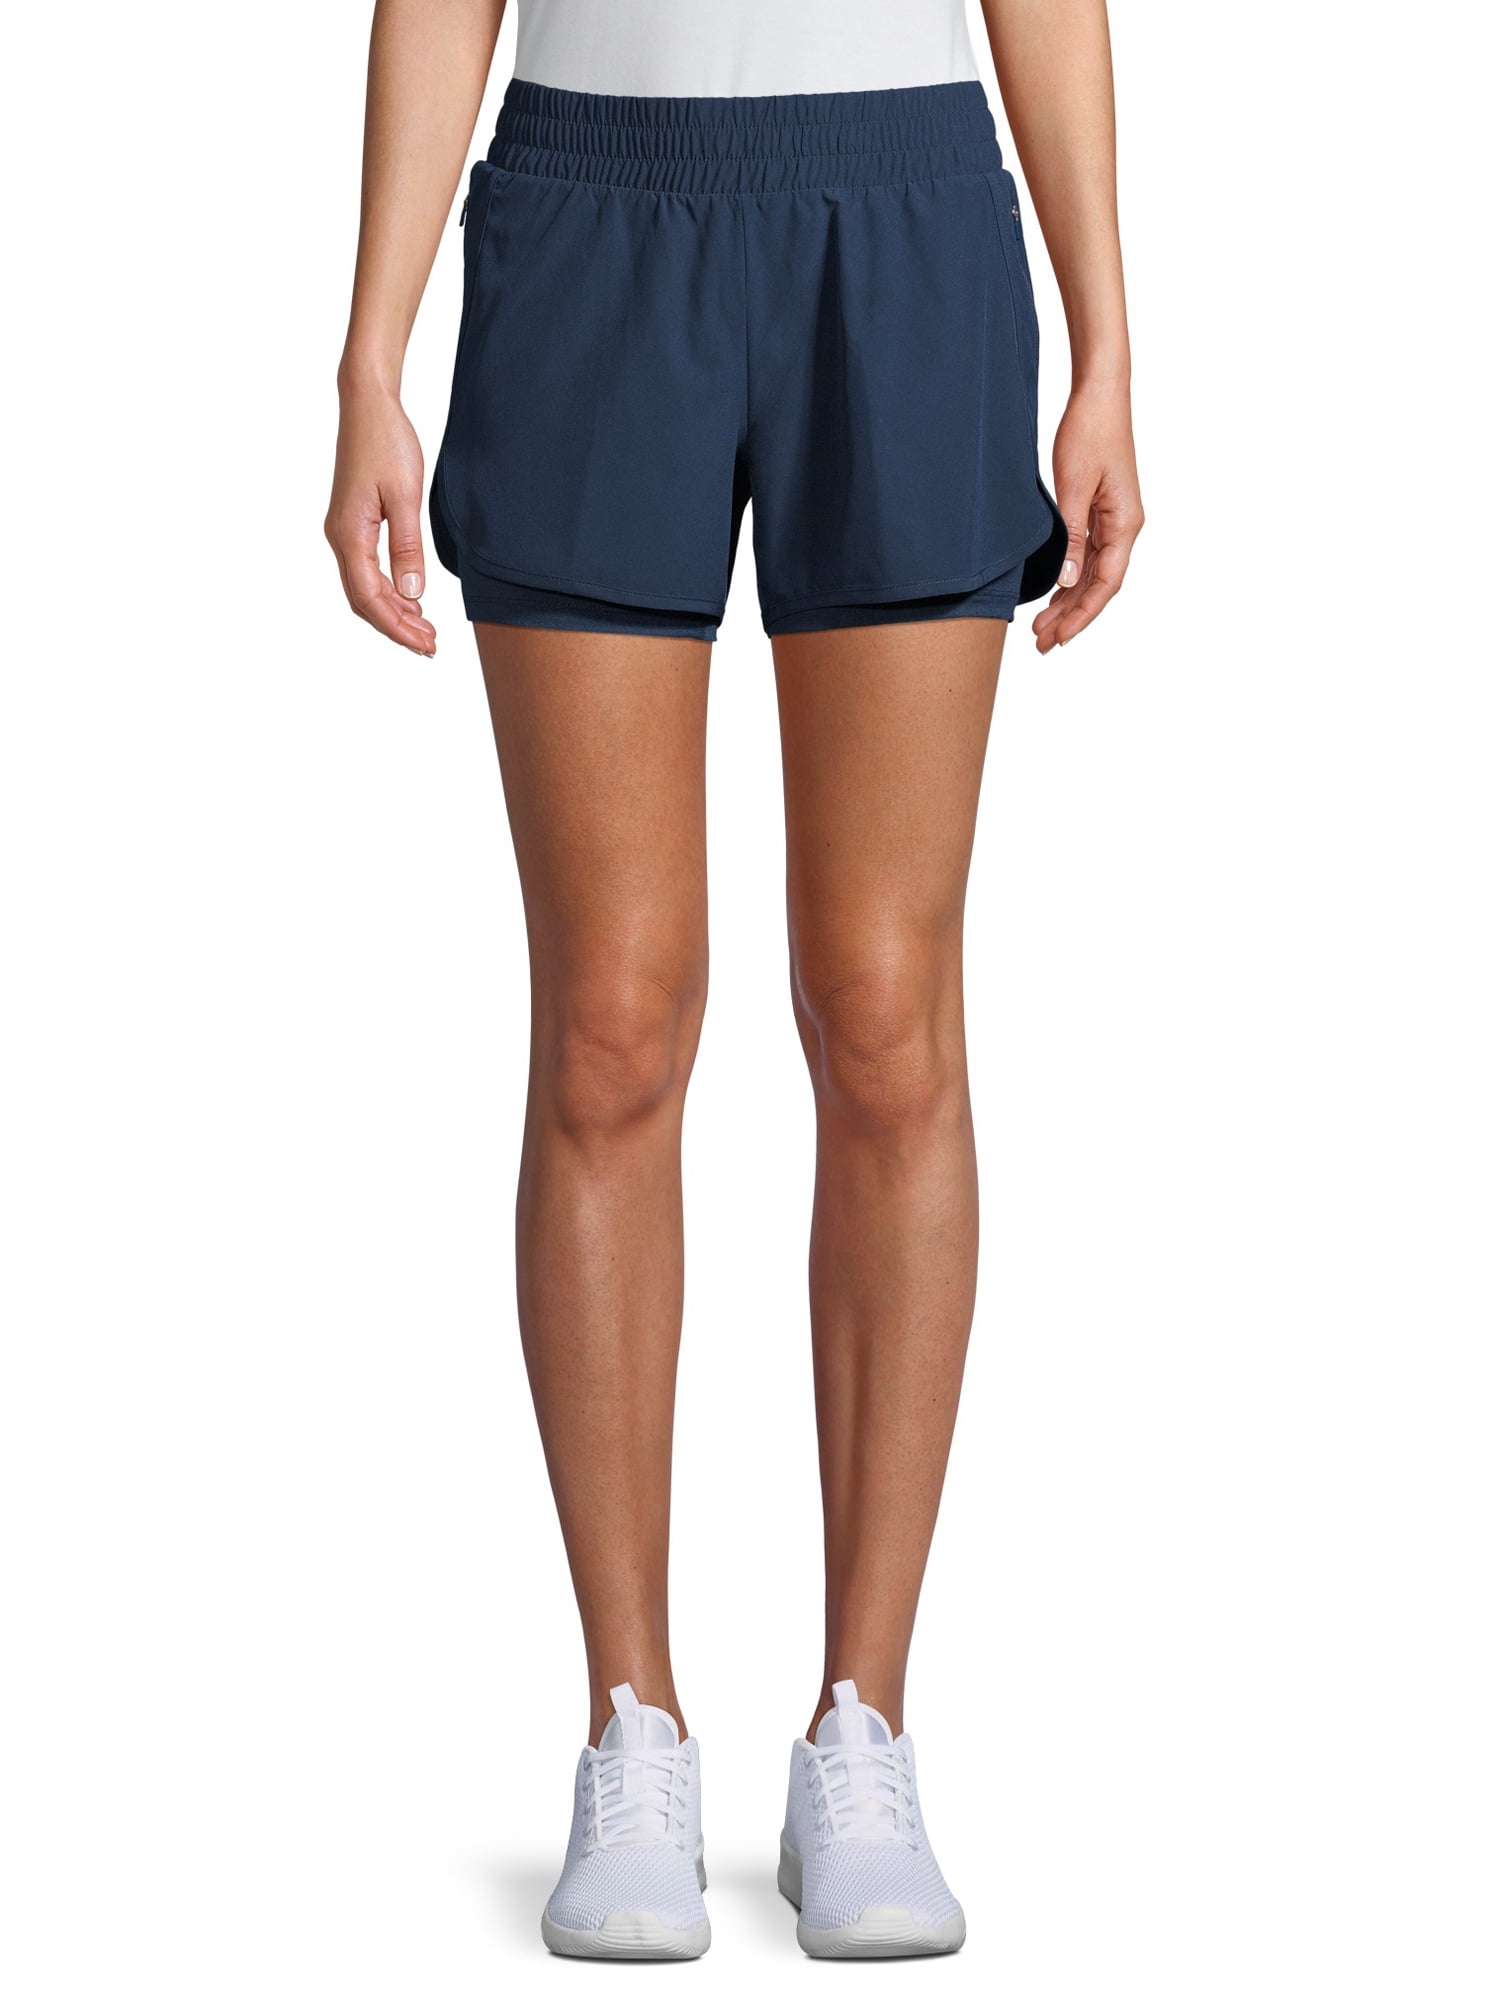 women's running shorts with spandex underneath